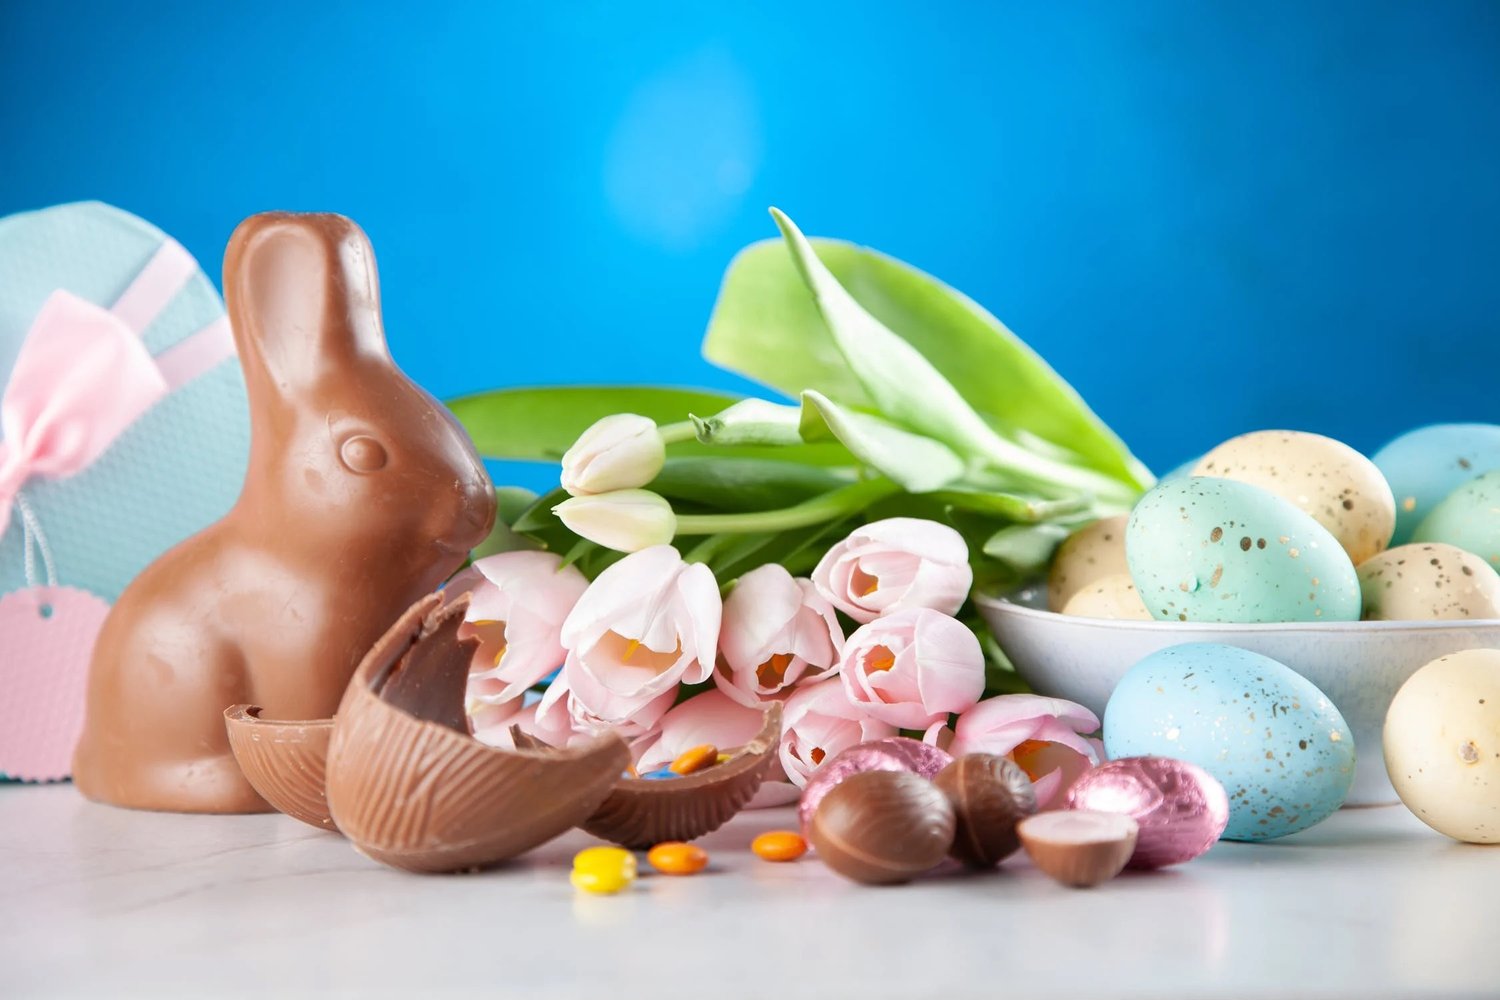 How to balance nutrition and food enjoyment this easter — Body Fusion Best Dietitian Sydney